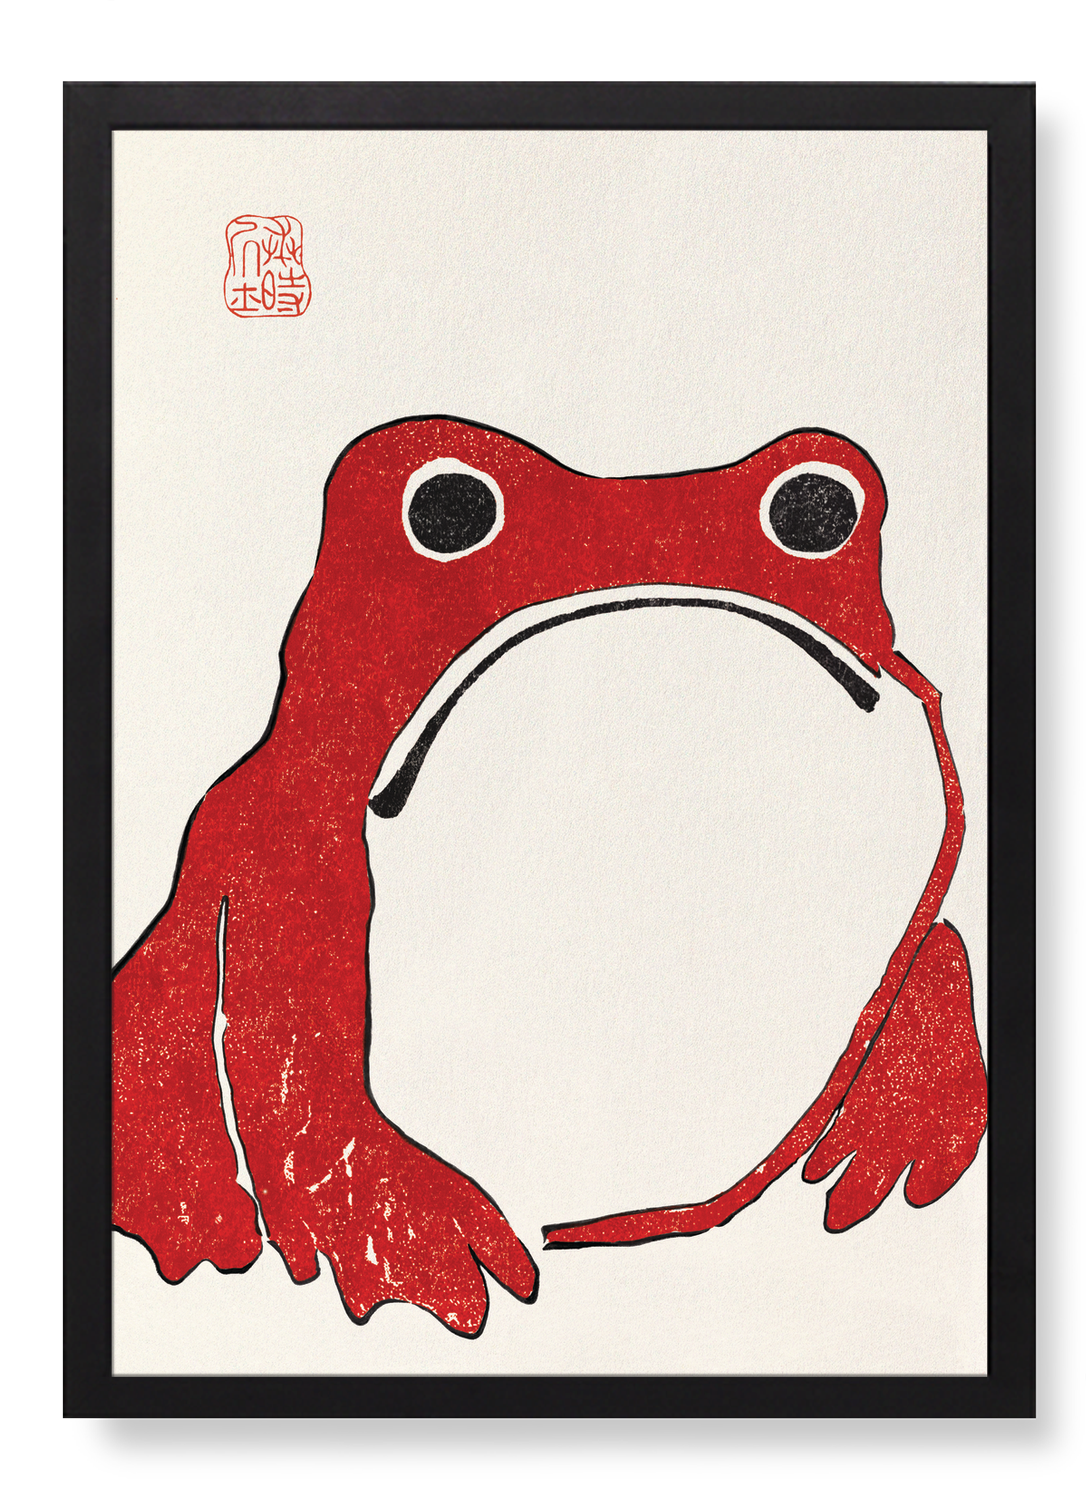 RED FROG